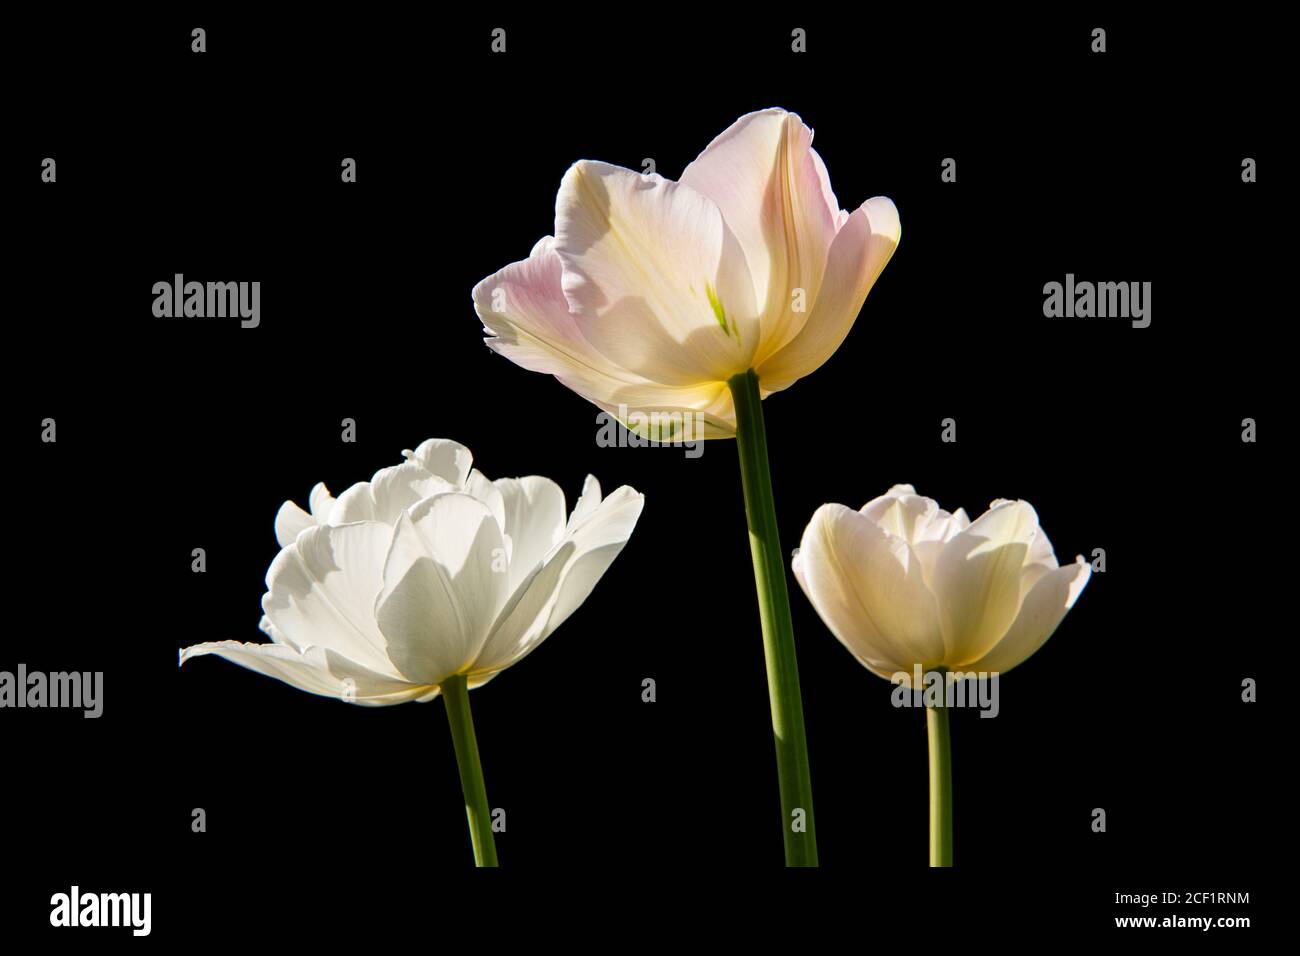 Three tulip flowers pointing towards the sun. Photograph taken against a black background. Stock Photo